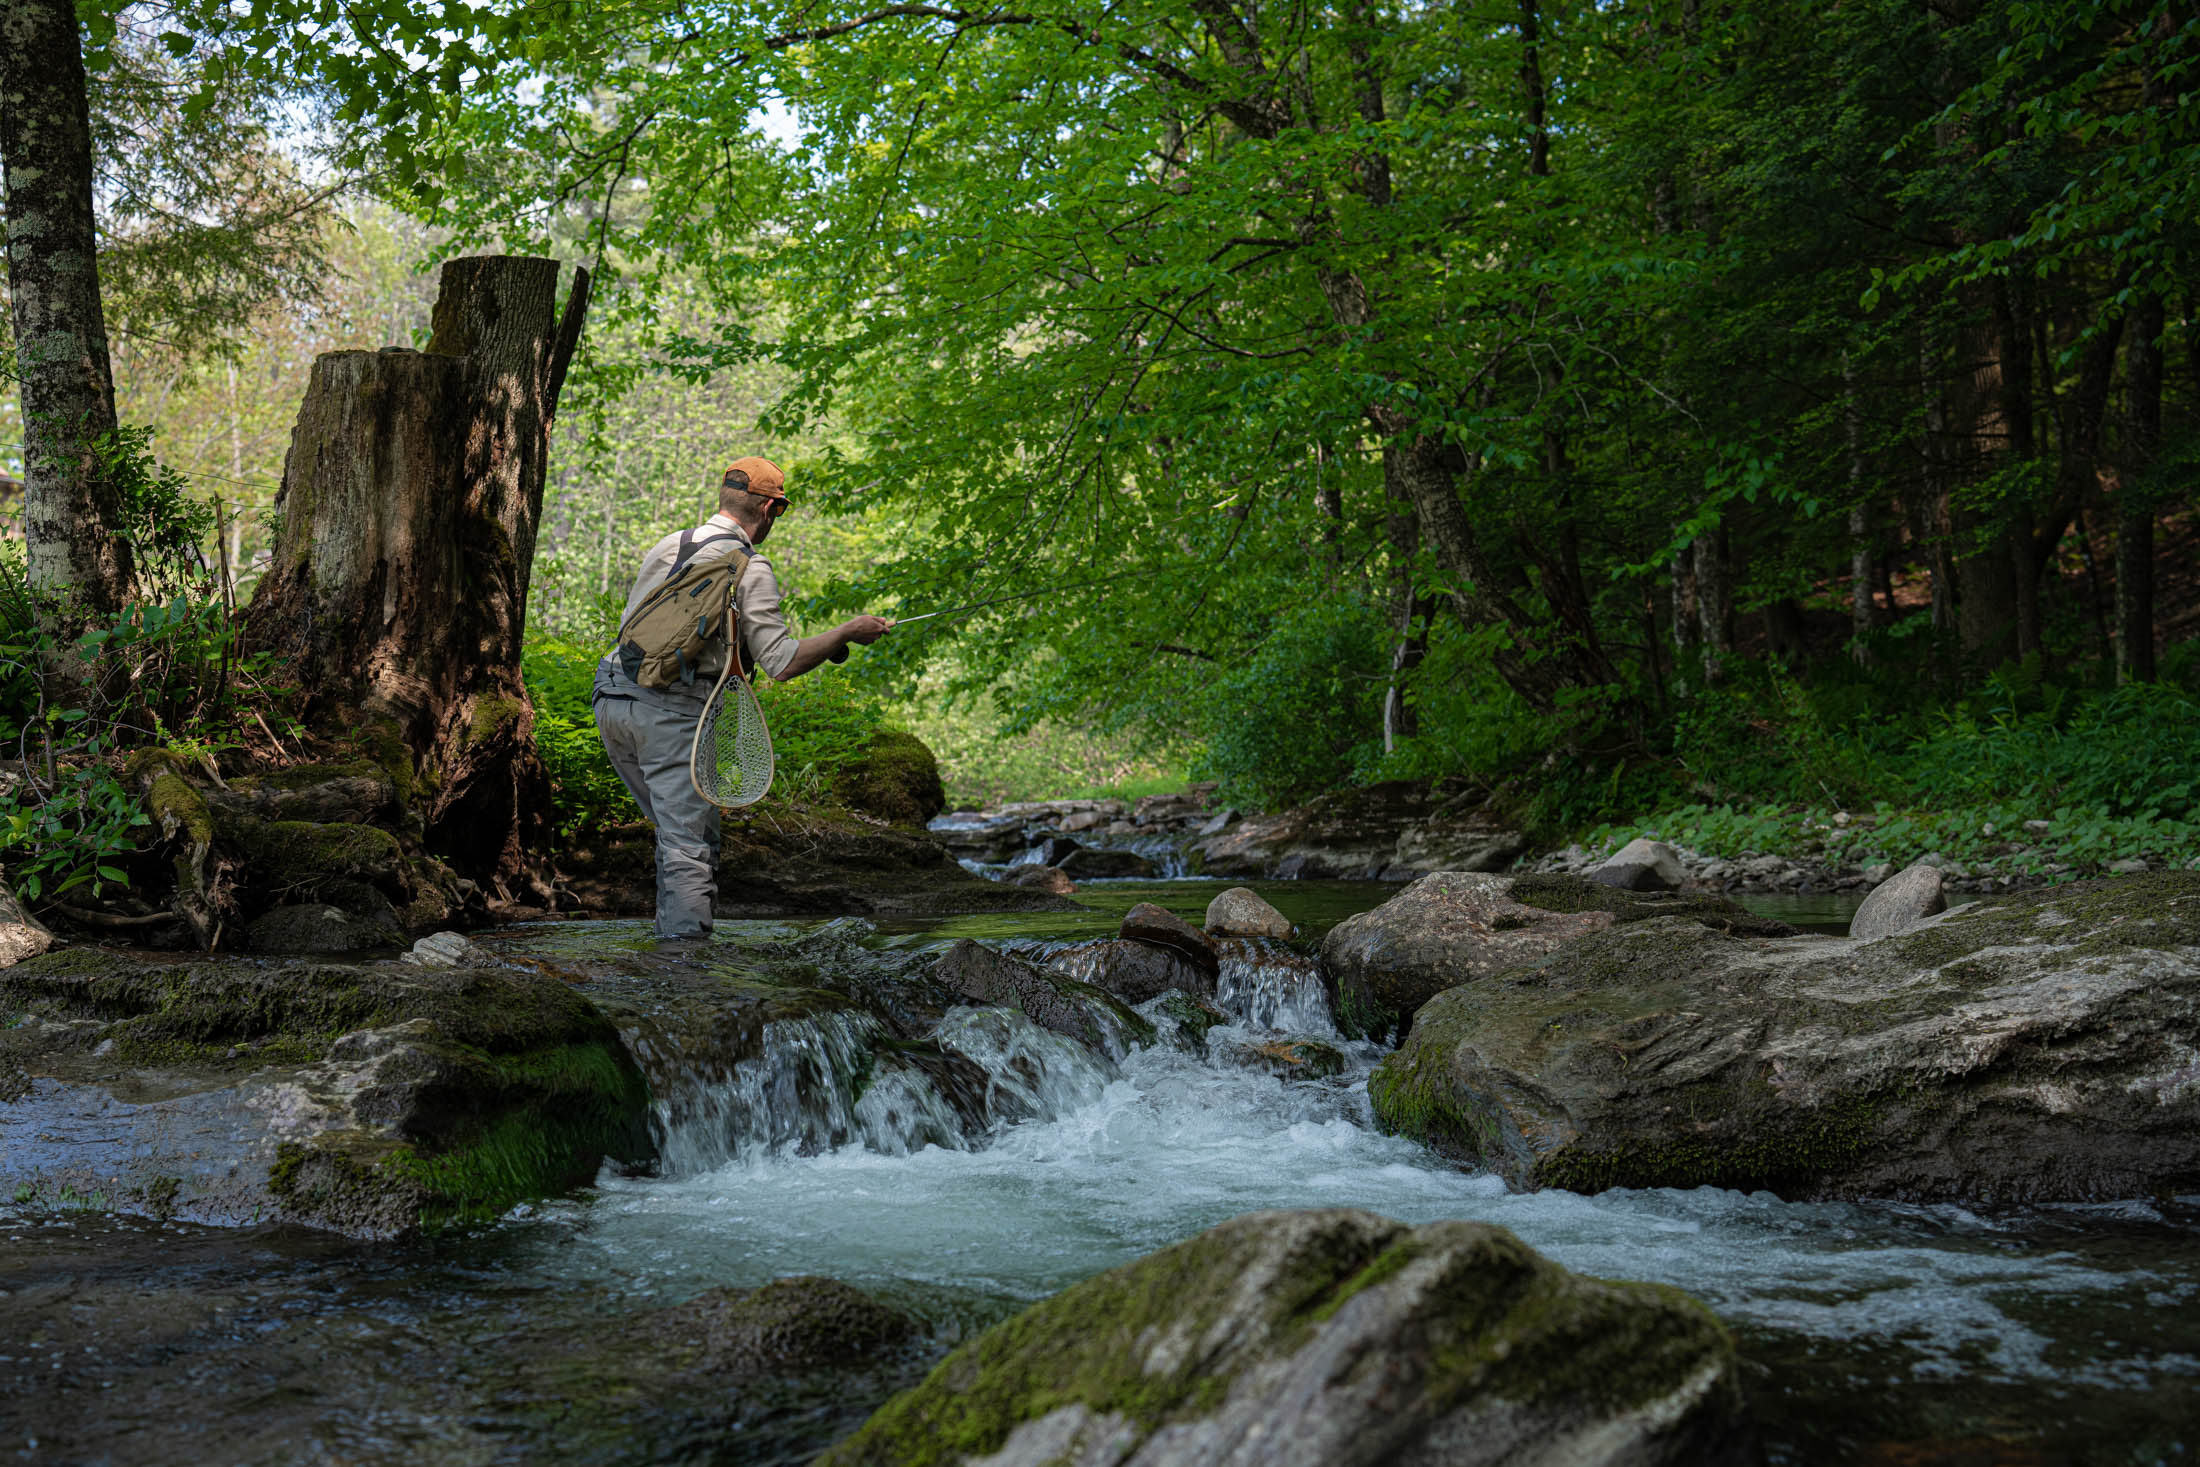 The Ultimate Guide to Fly Fishing in Vermont